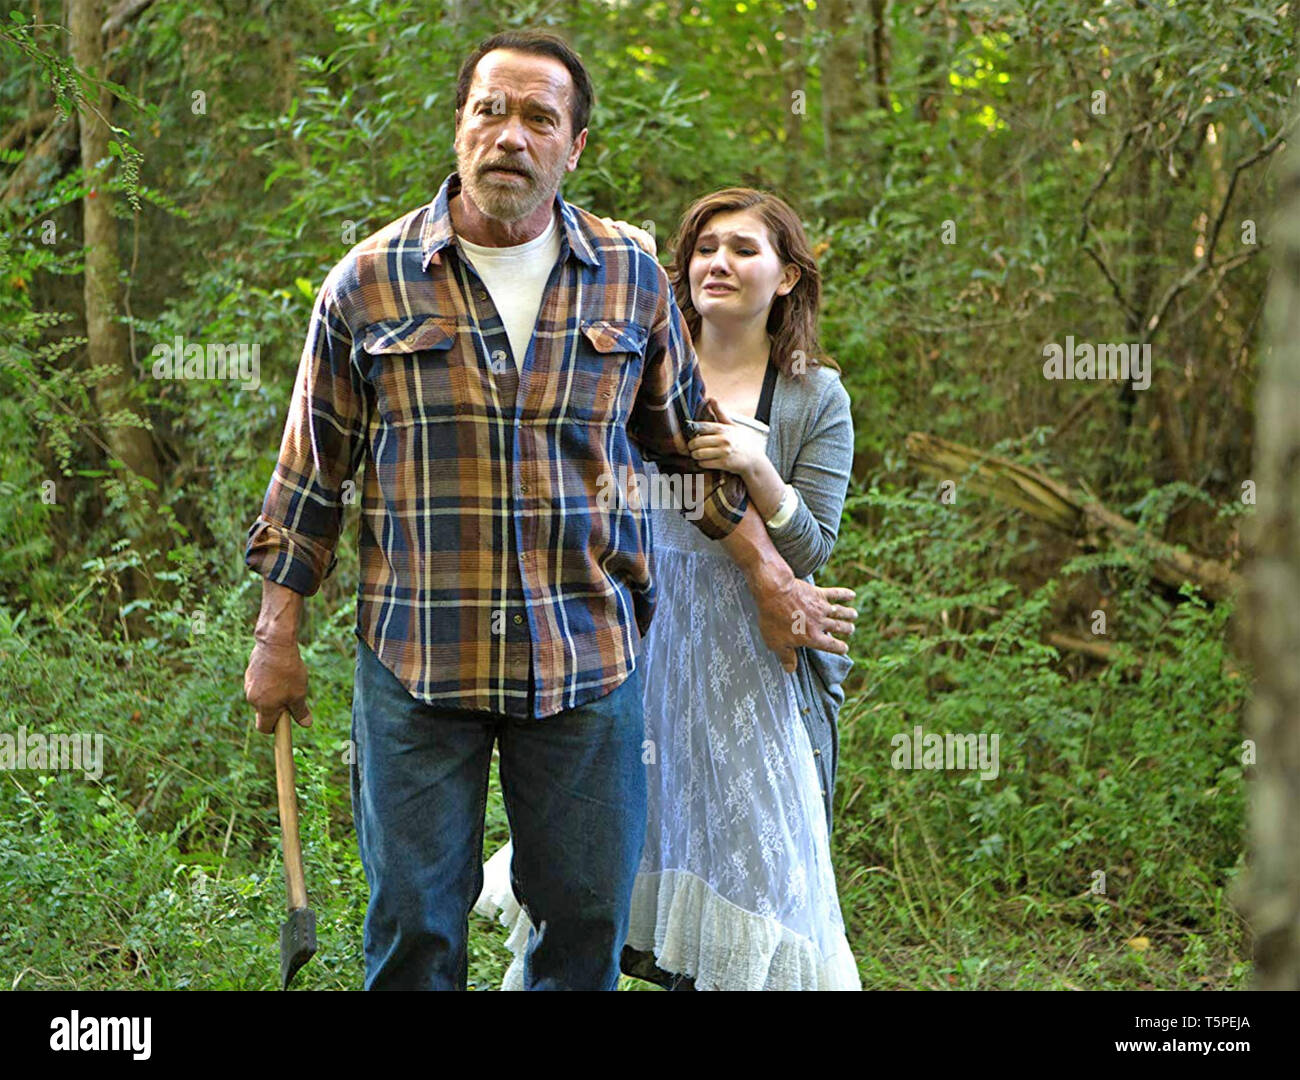 MAGGIE 2015 Lionsgate film with Arnold Schwarzenegger and Abigail Breslin Stock Photo